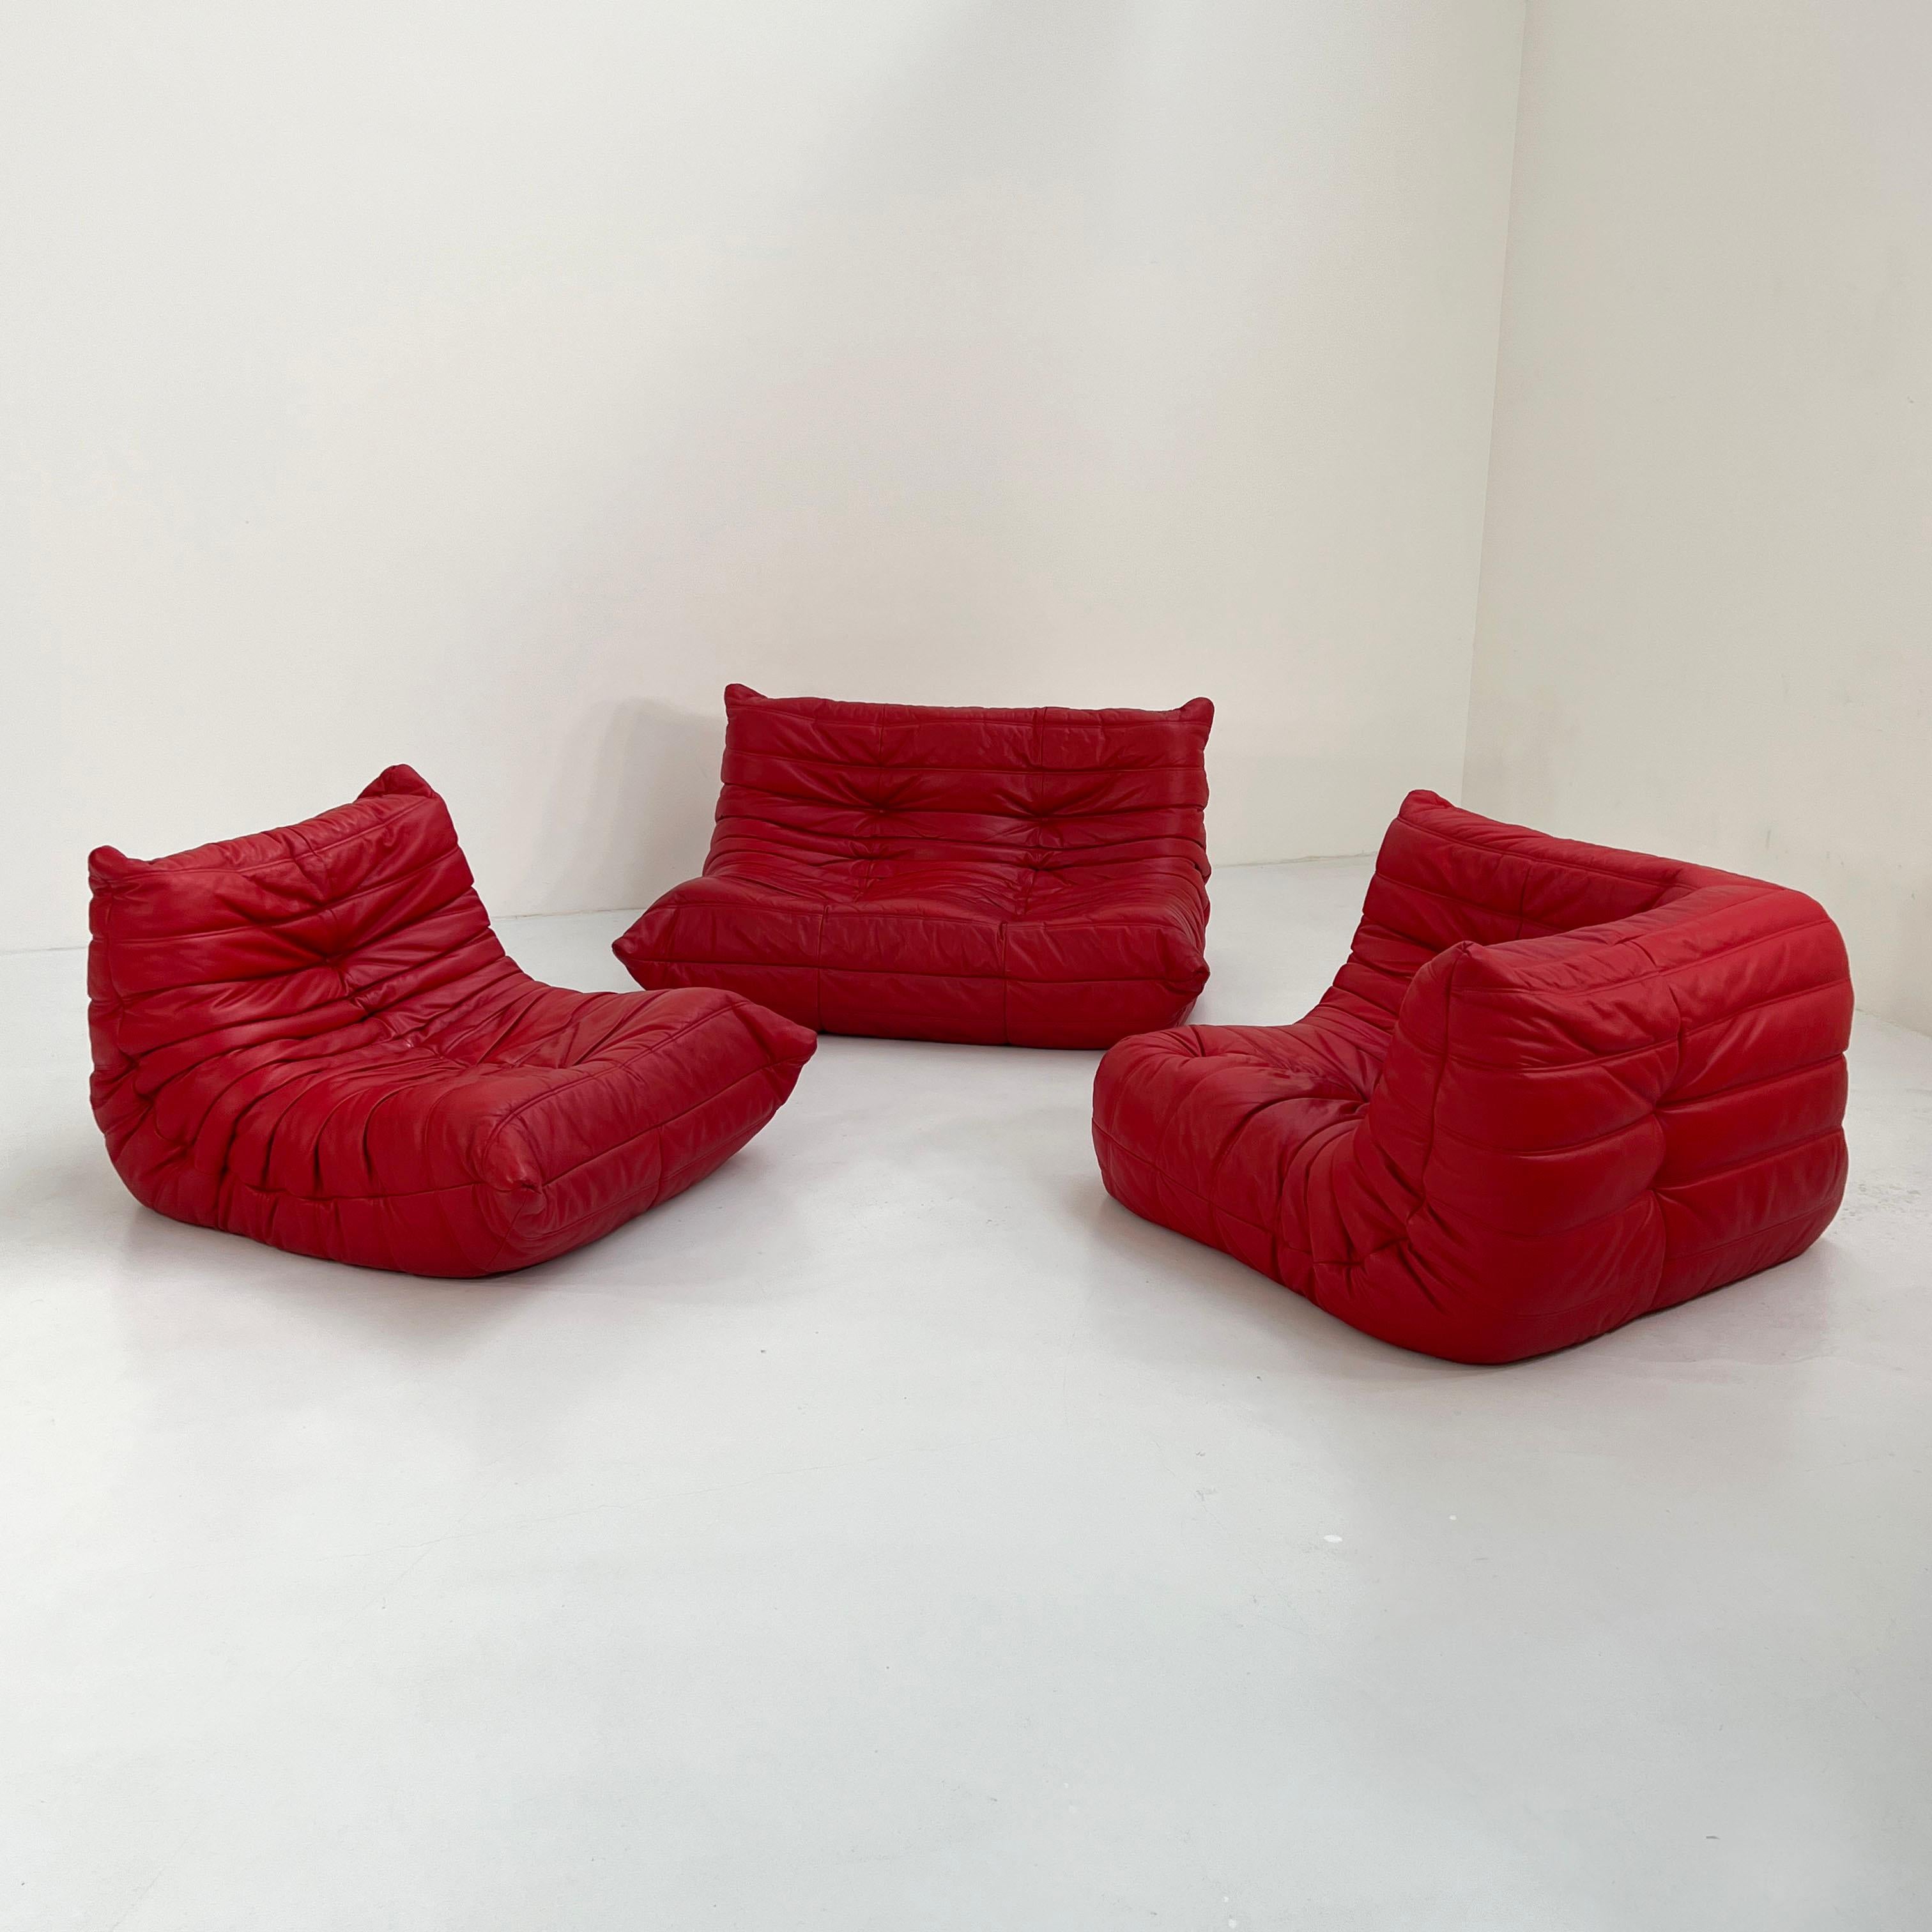 Italian Togo Sofa Set in Red Leather by Michel Ducaroy for Ligne Roset, 1970s